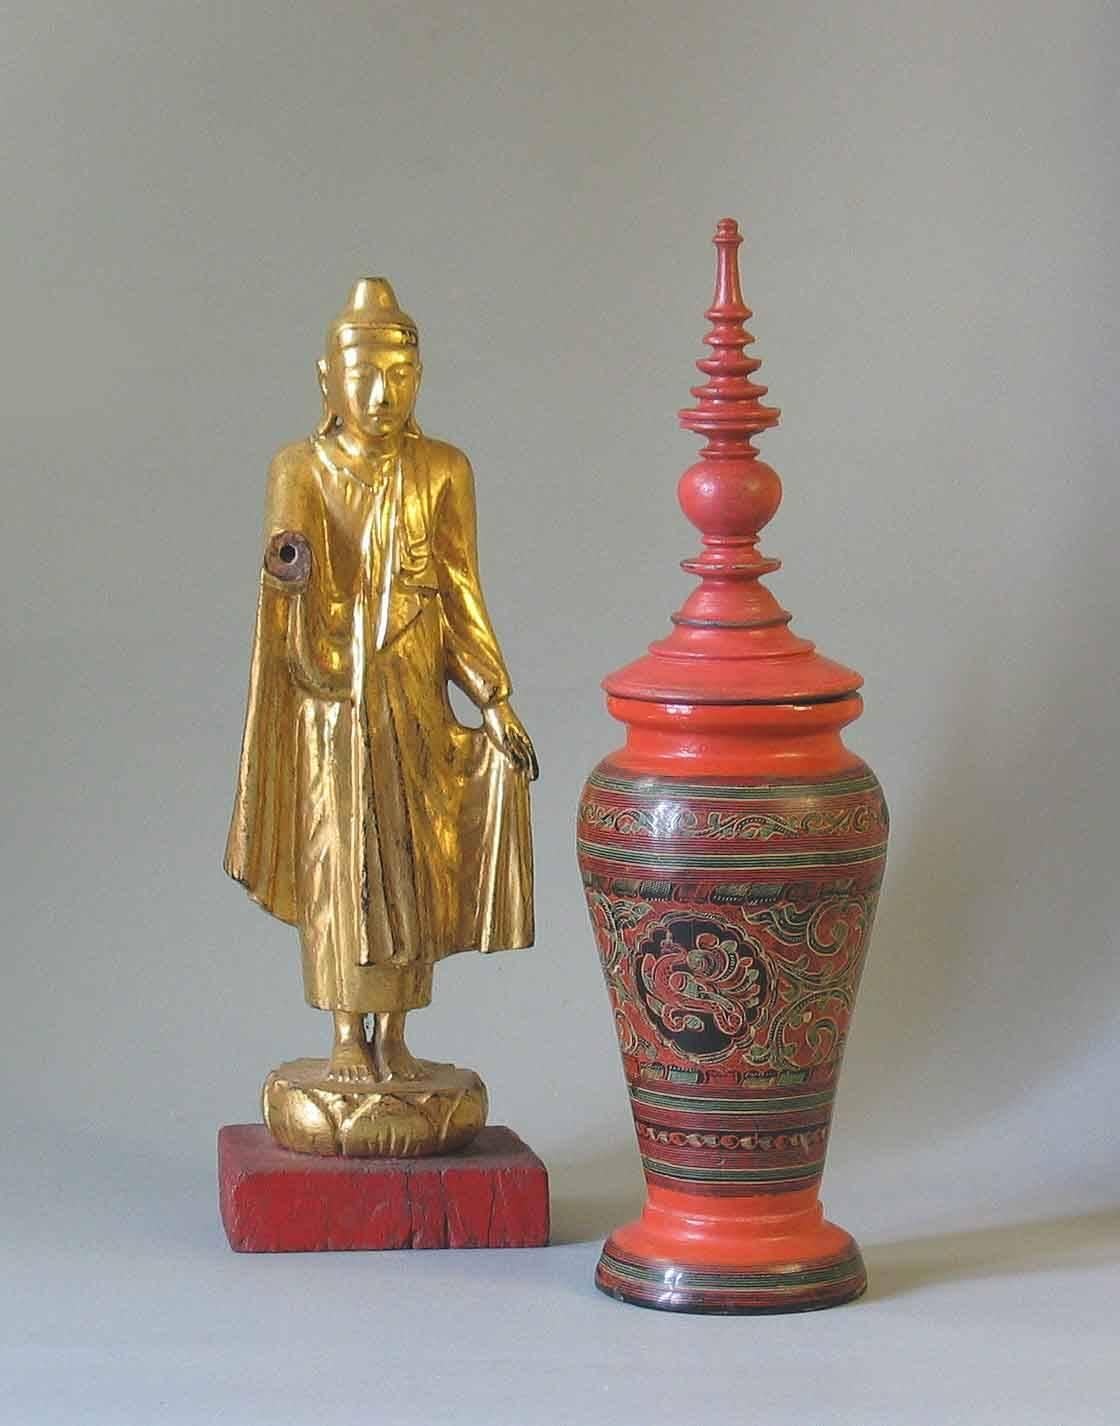 Burmese Mandalay Style Gilt Lacquered Buddha & Red Lacquer Covered Baluster Vase For Sale 3